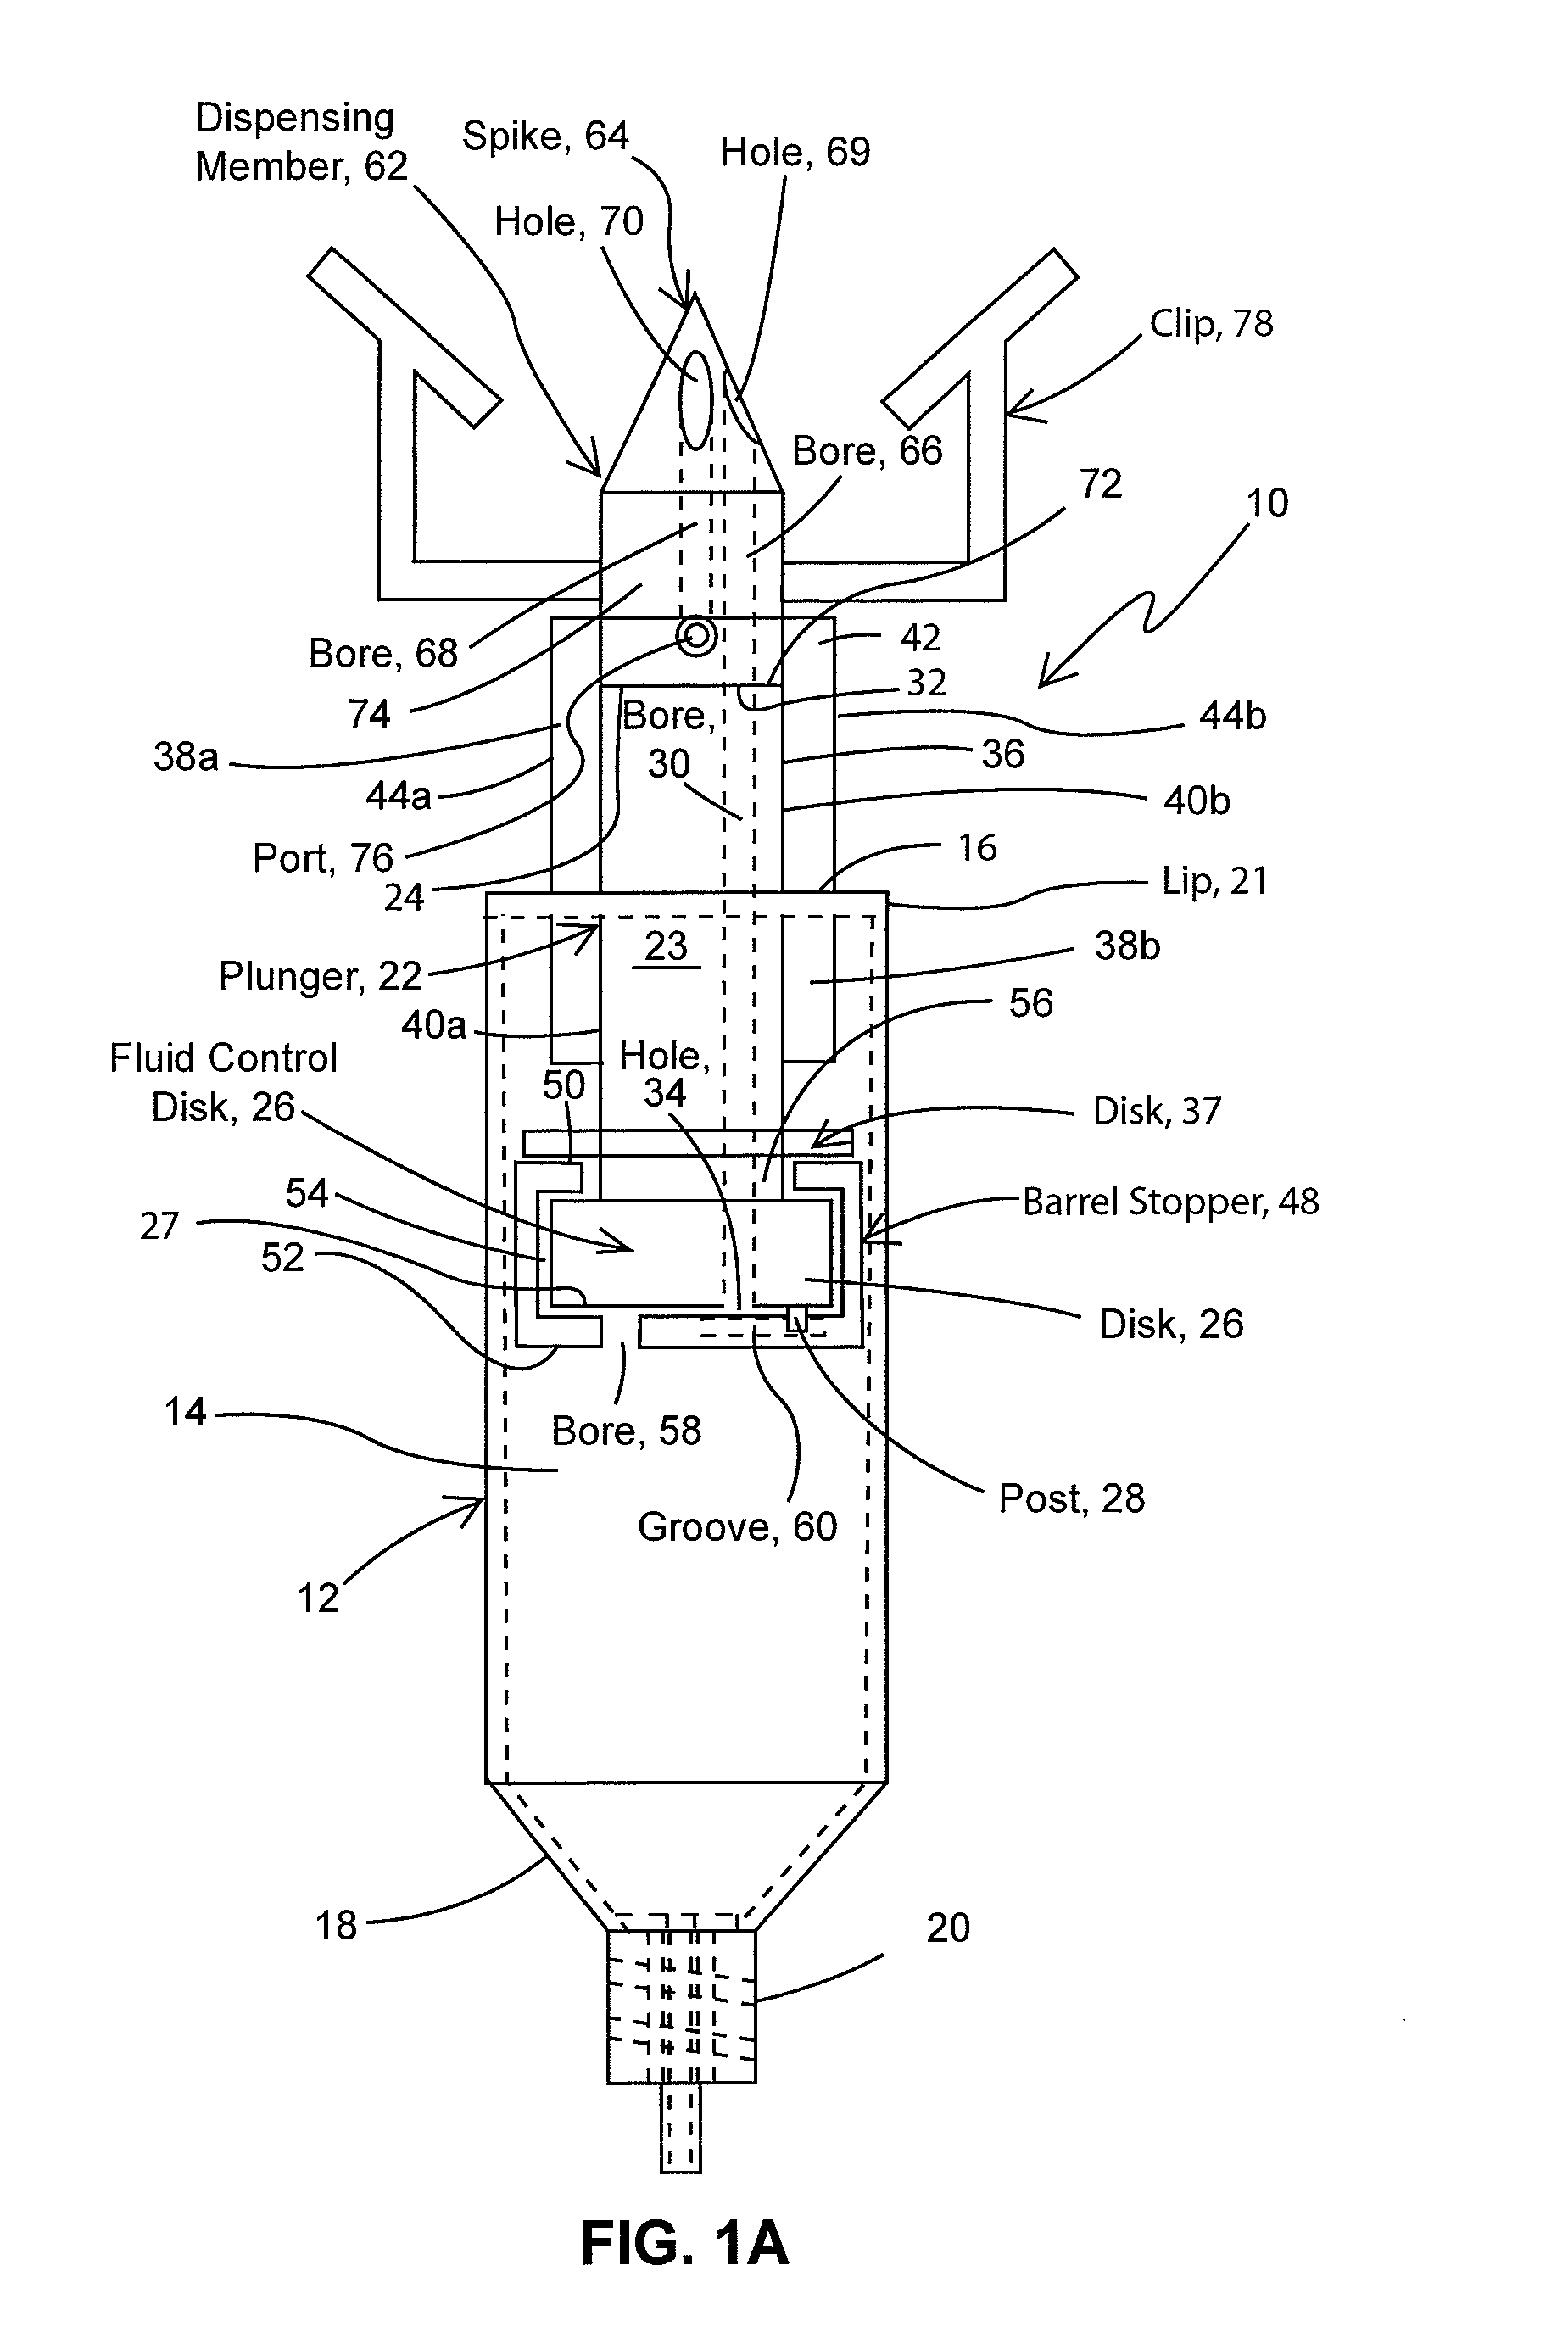 Apparatus for mixing and transferring medications